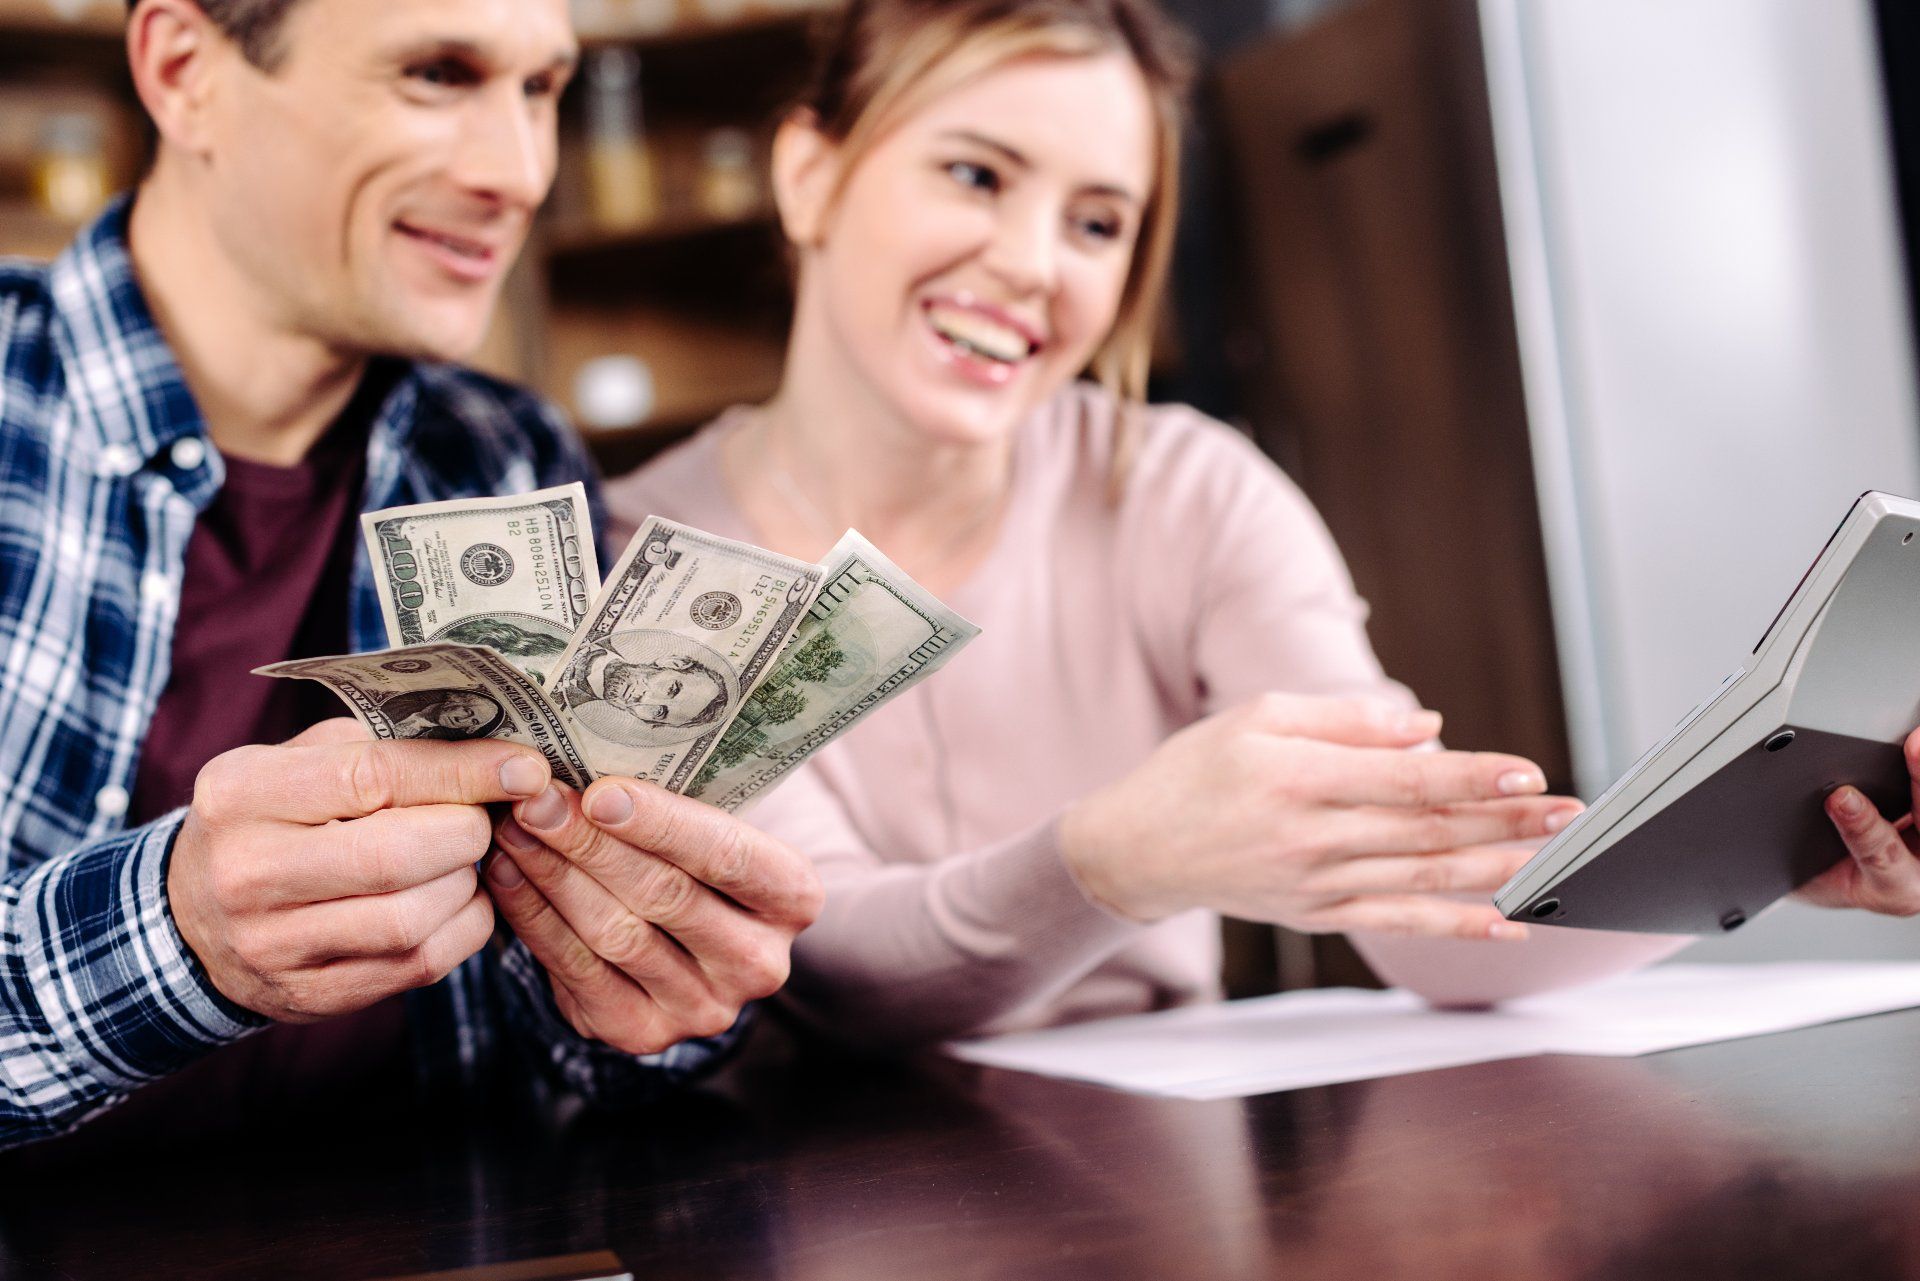 A happy couple at a table holds fanned out cash while looking at a calculator - ftc refunds